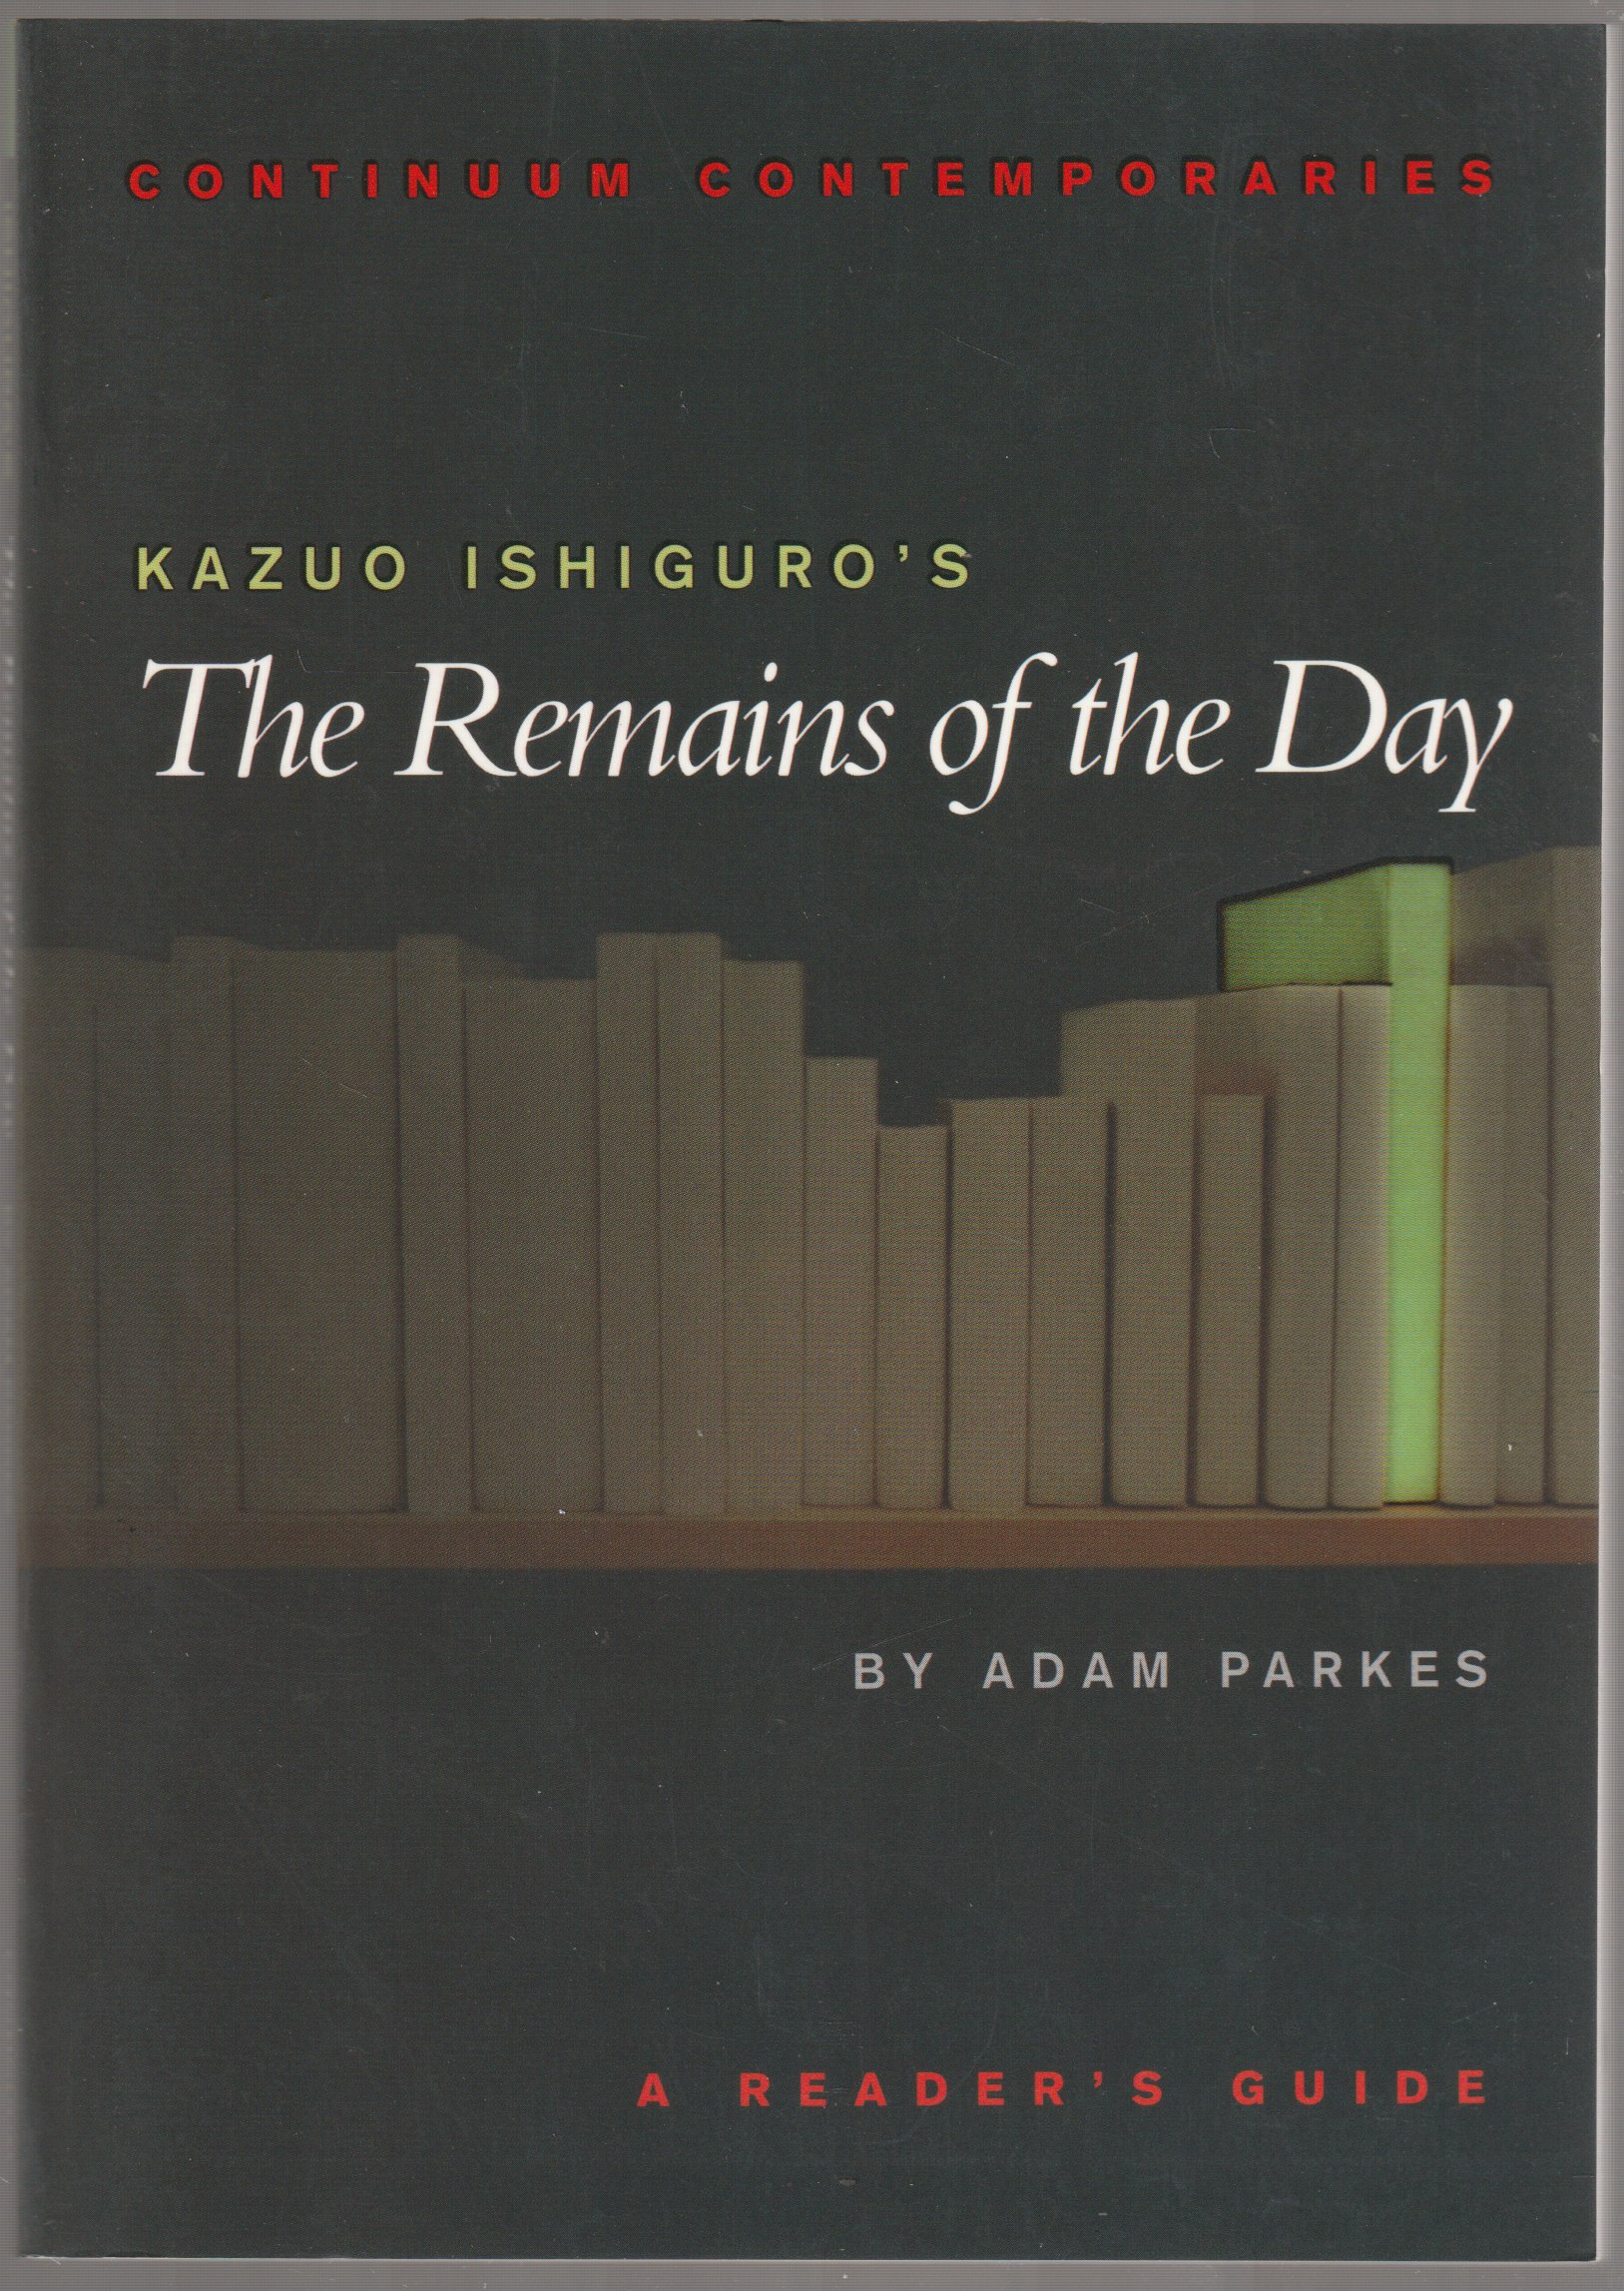 Kazuo Ishiguro's The remains of the day : a reader's guide.